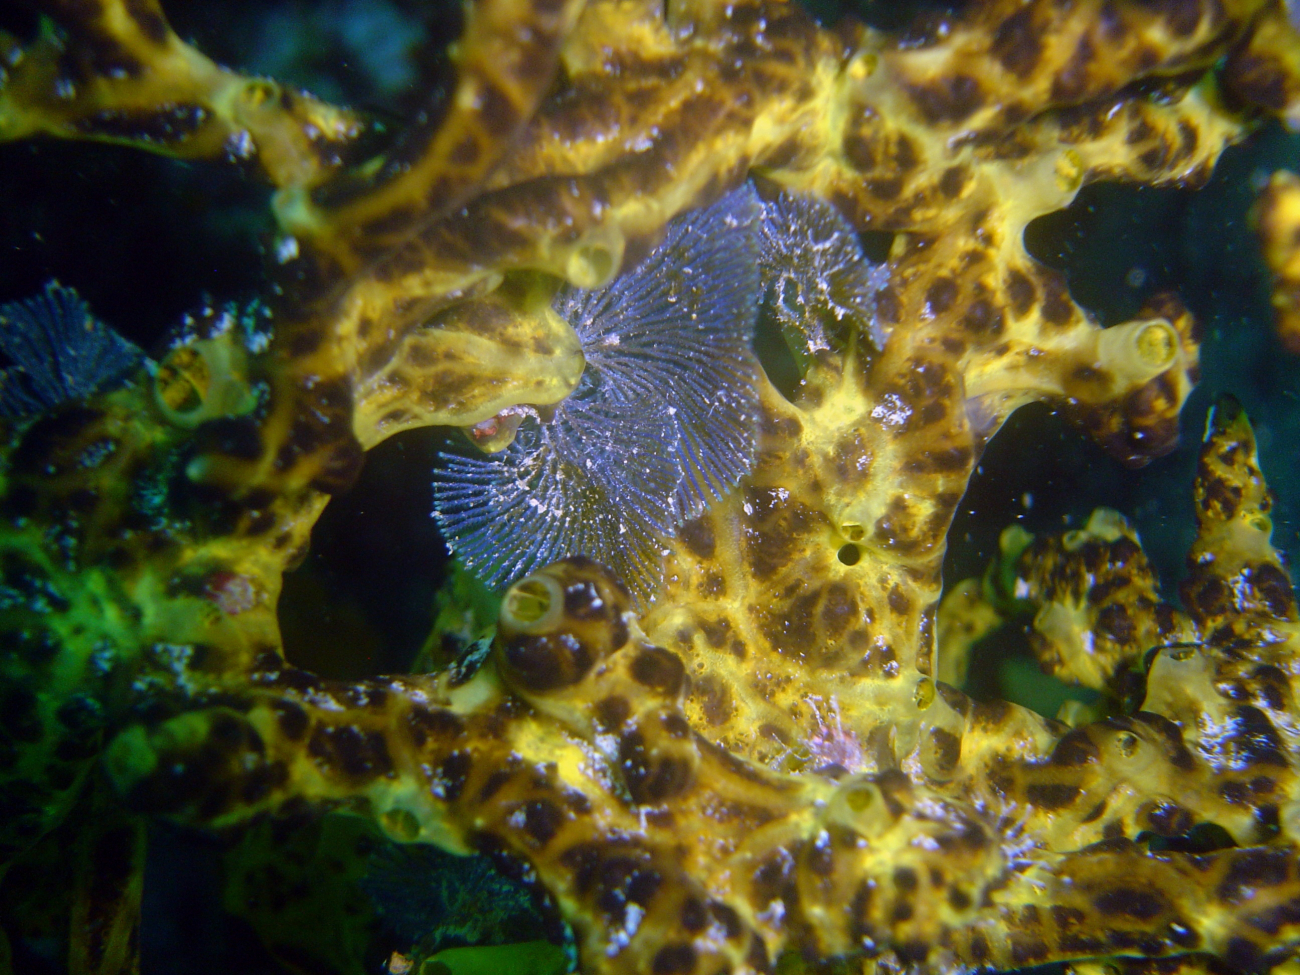 Unidentified sponge with hydroid?